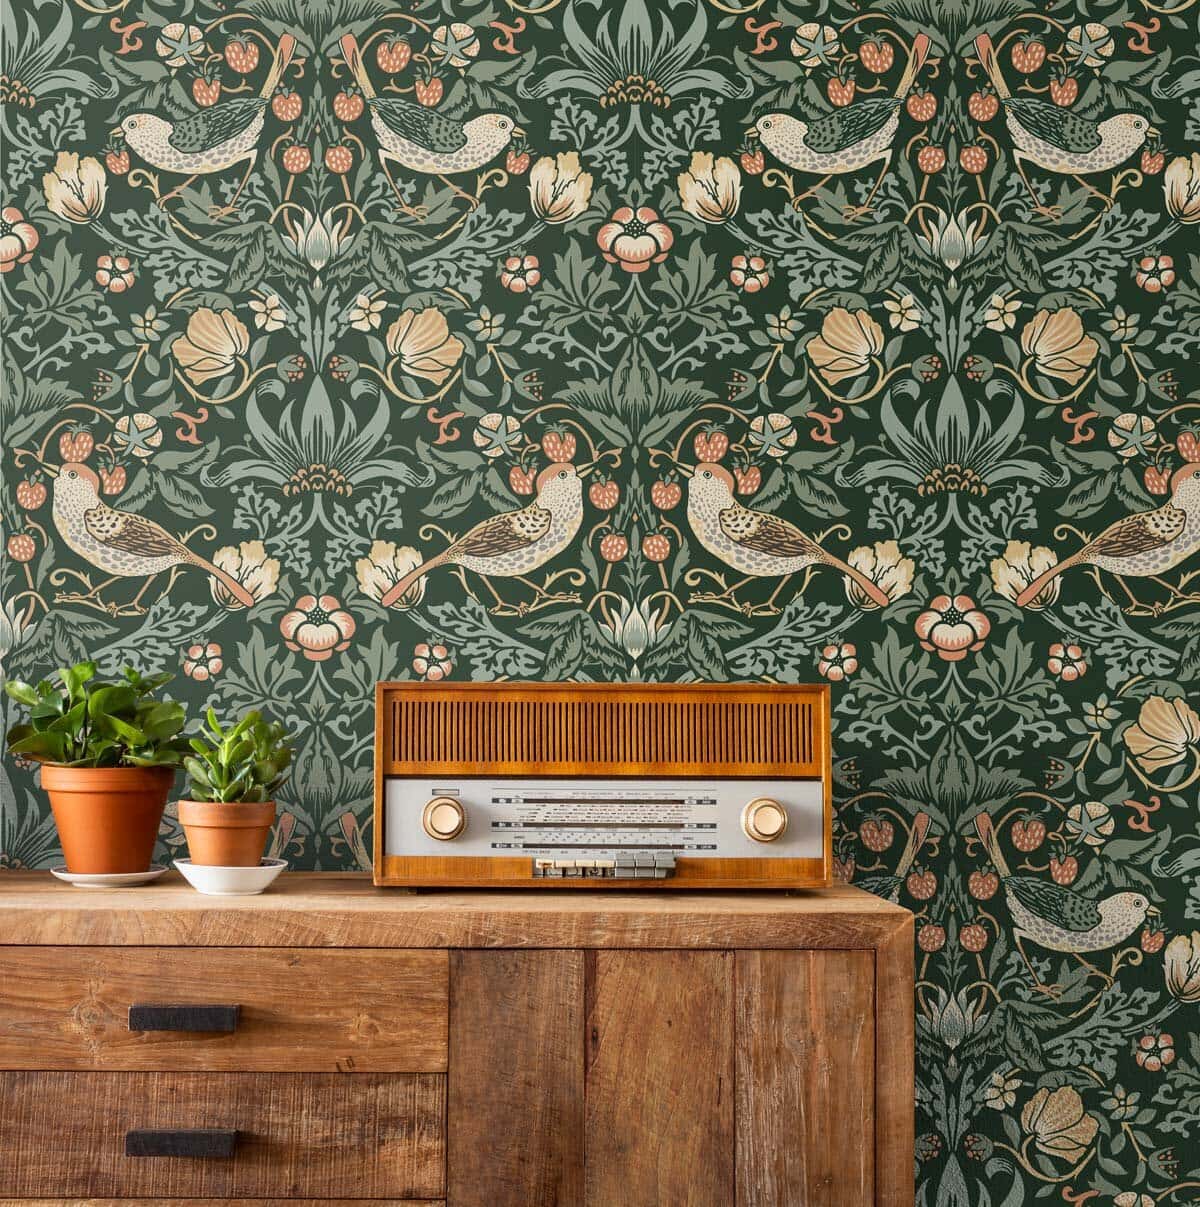 Skip the Decor and Try Removable Wallpaper